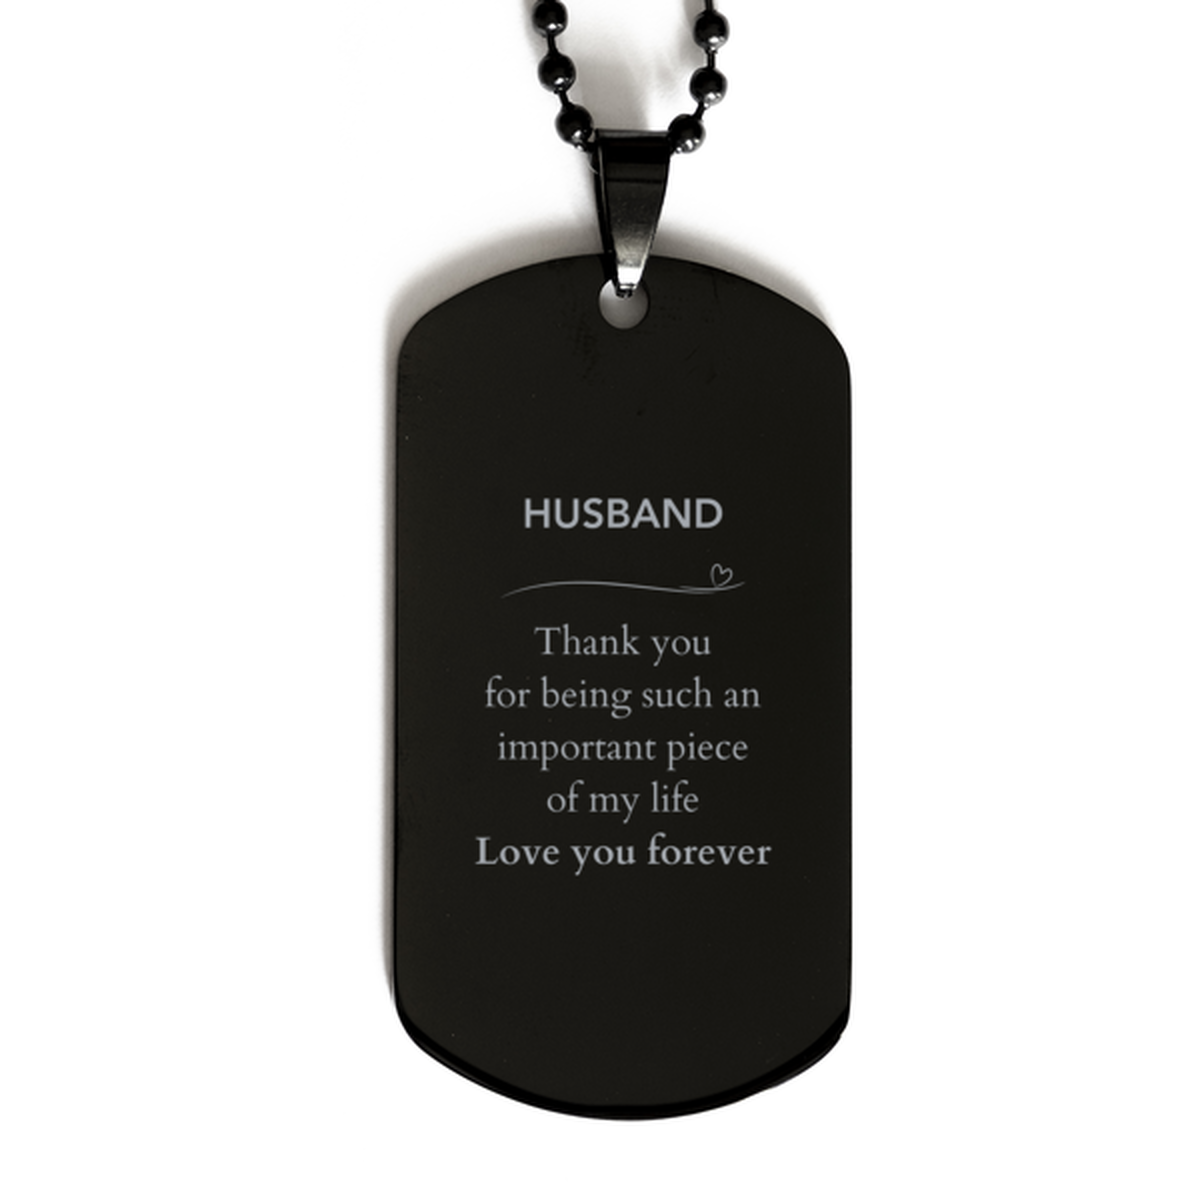 Appropriate Husband Black Dog Tag Epic Birthday Gifts for Husband Thank you for being such an important piece of my life Husband Christmas Mothers Fathers Day